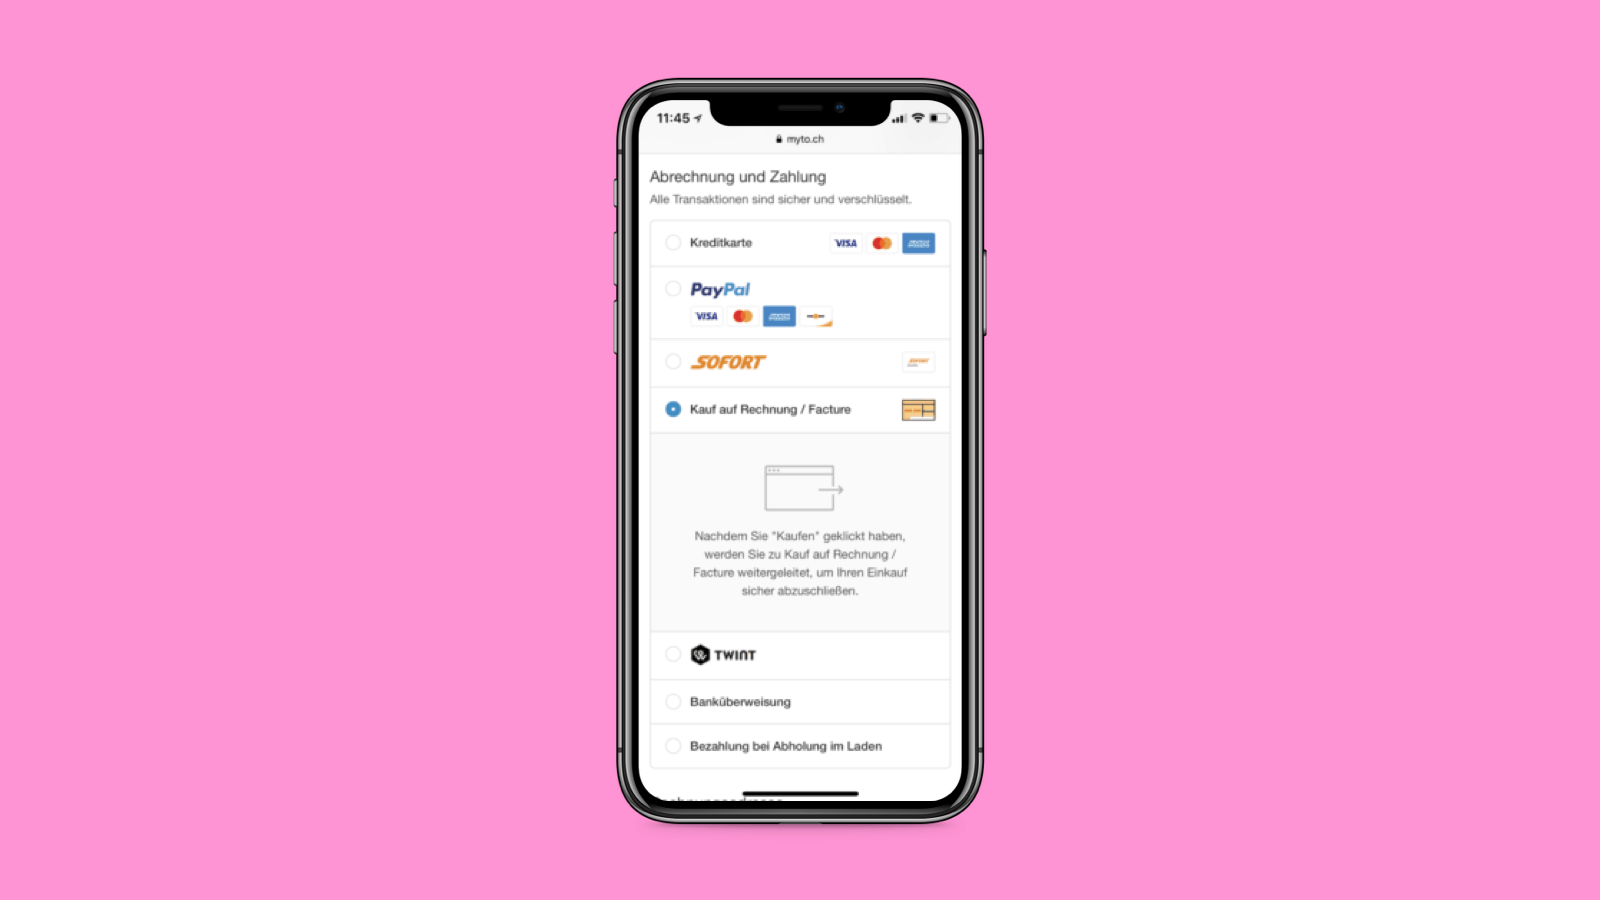 Payment method in mobile checkout